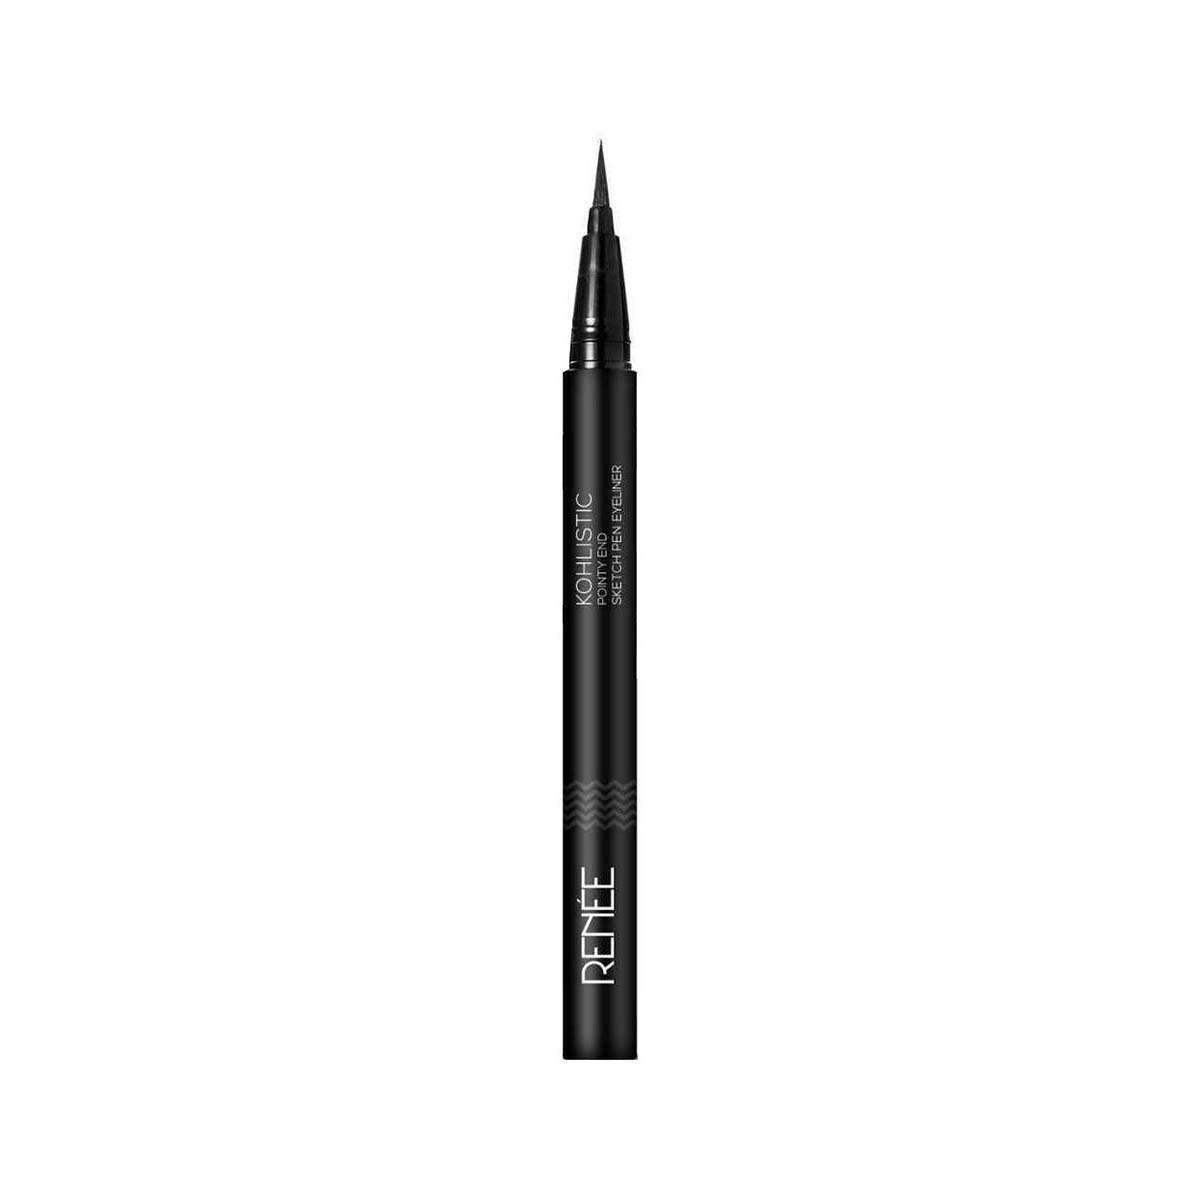 MAYBELLINE NEW YORK Colossal Pen Liner 1.2 ml - Price in India, Buy  MAYBELLINE NEW YORK Colossal Pen Liner 1.2 ml Online In India, Reviews,  Ratings & Features | Flipkart.com